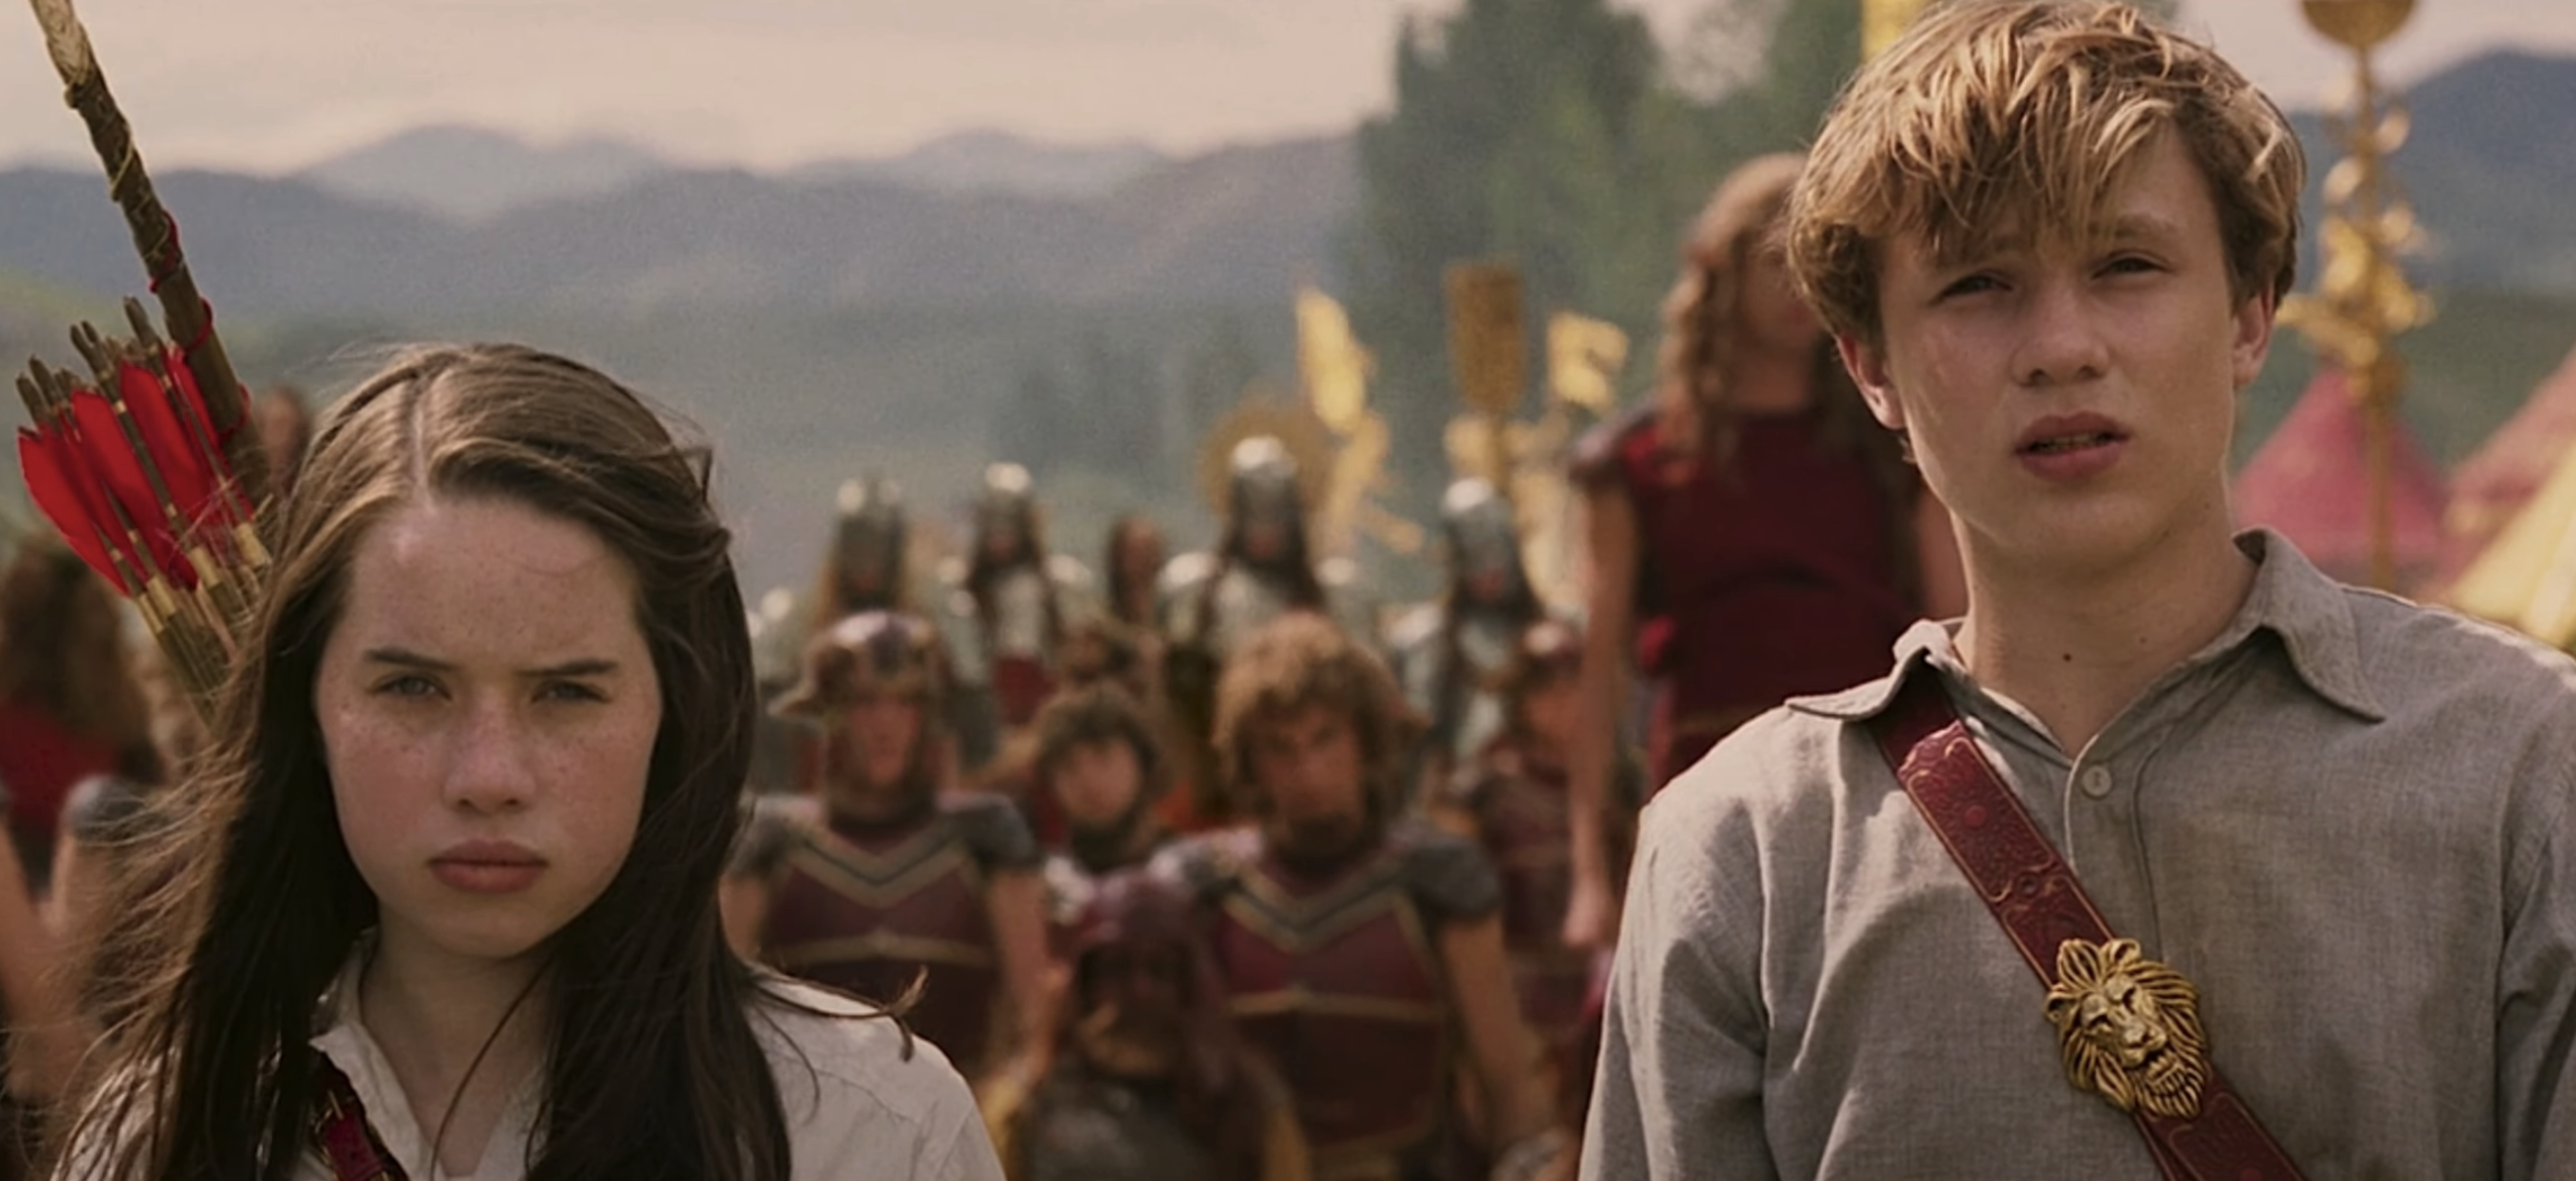 Susan and Peter from Chronicles of Narnia stand with solemn expressions, medieval army in background